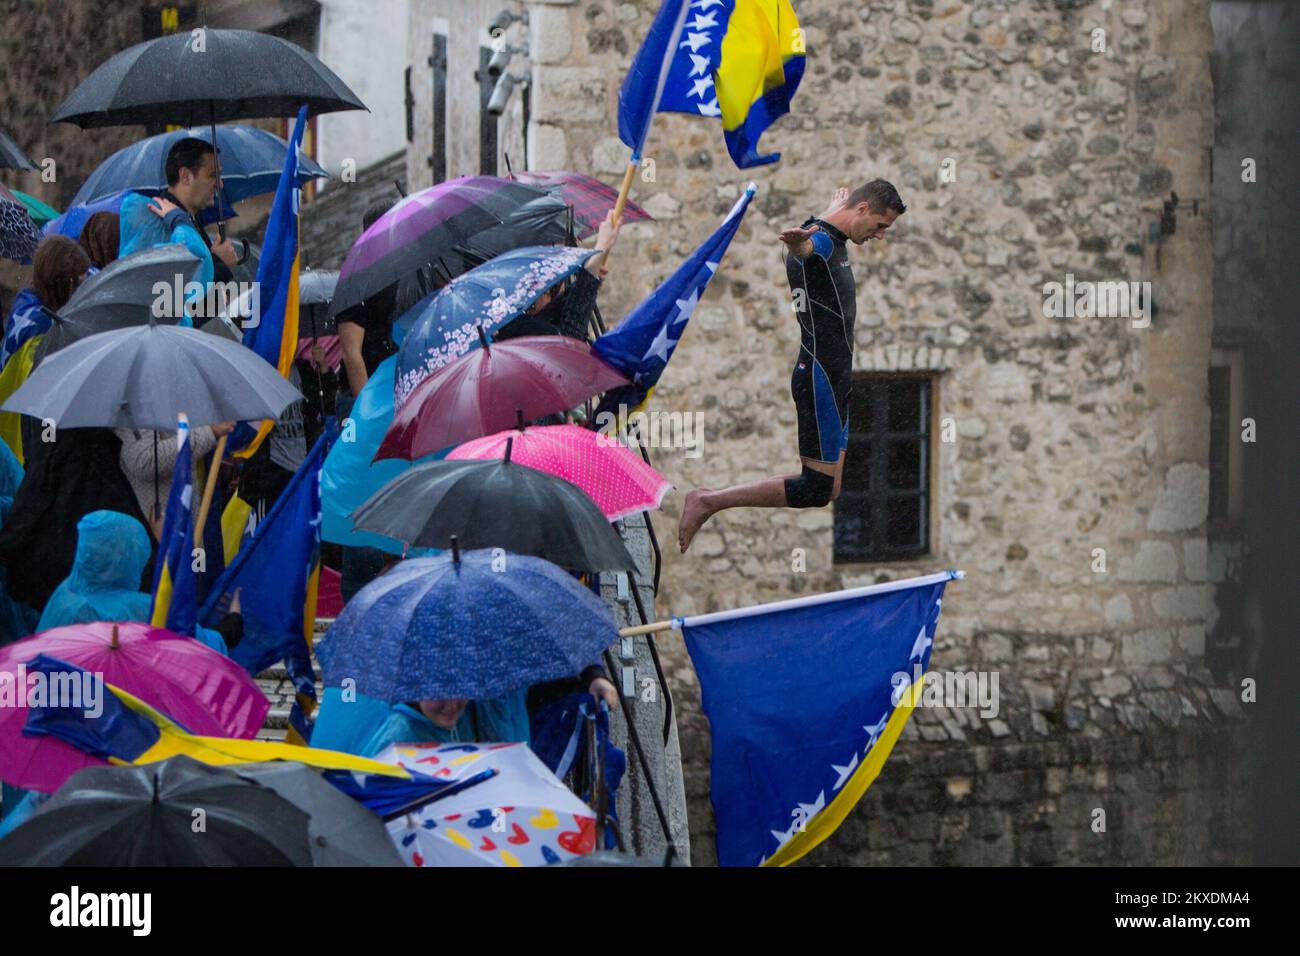 09.11.2019., Bosnia and Herzegovina, Mostar - Applause-free jump for the 26th anniversary of the demolition of the Old Bridge. The bridge was built between 1557 and 1566 and that was the order of sultan Suleiman the Magnificent. The bridge was demolished in 1993 during the war. Photo: Denis Kapetanovic/PIXSELL Stock Photo